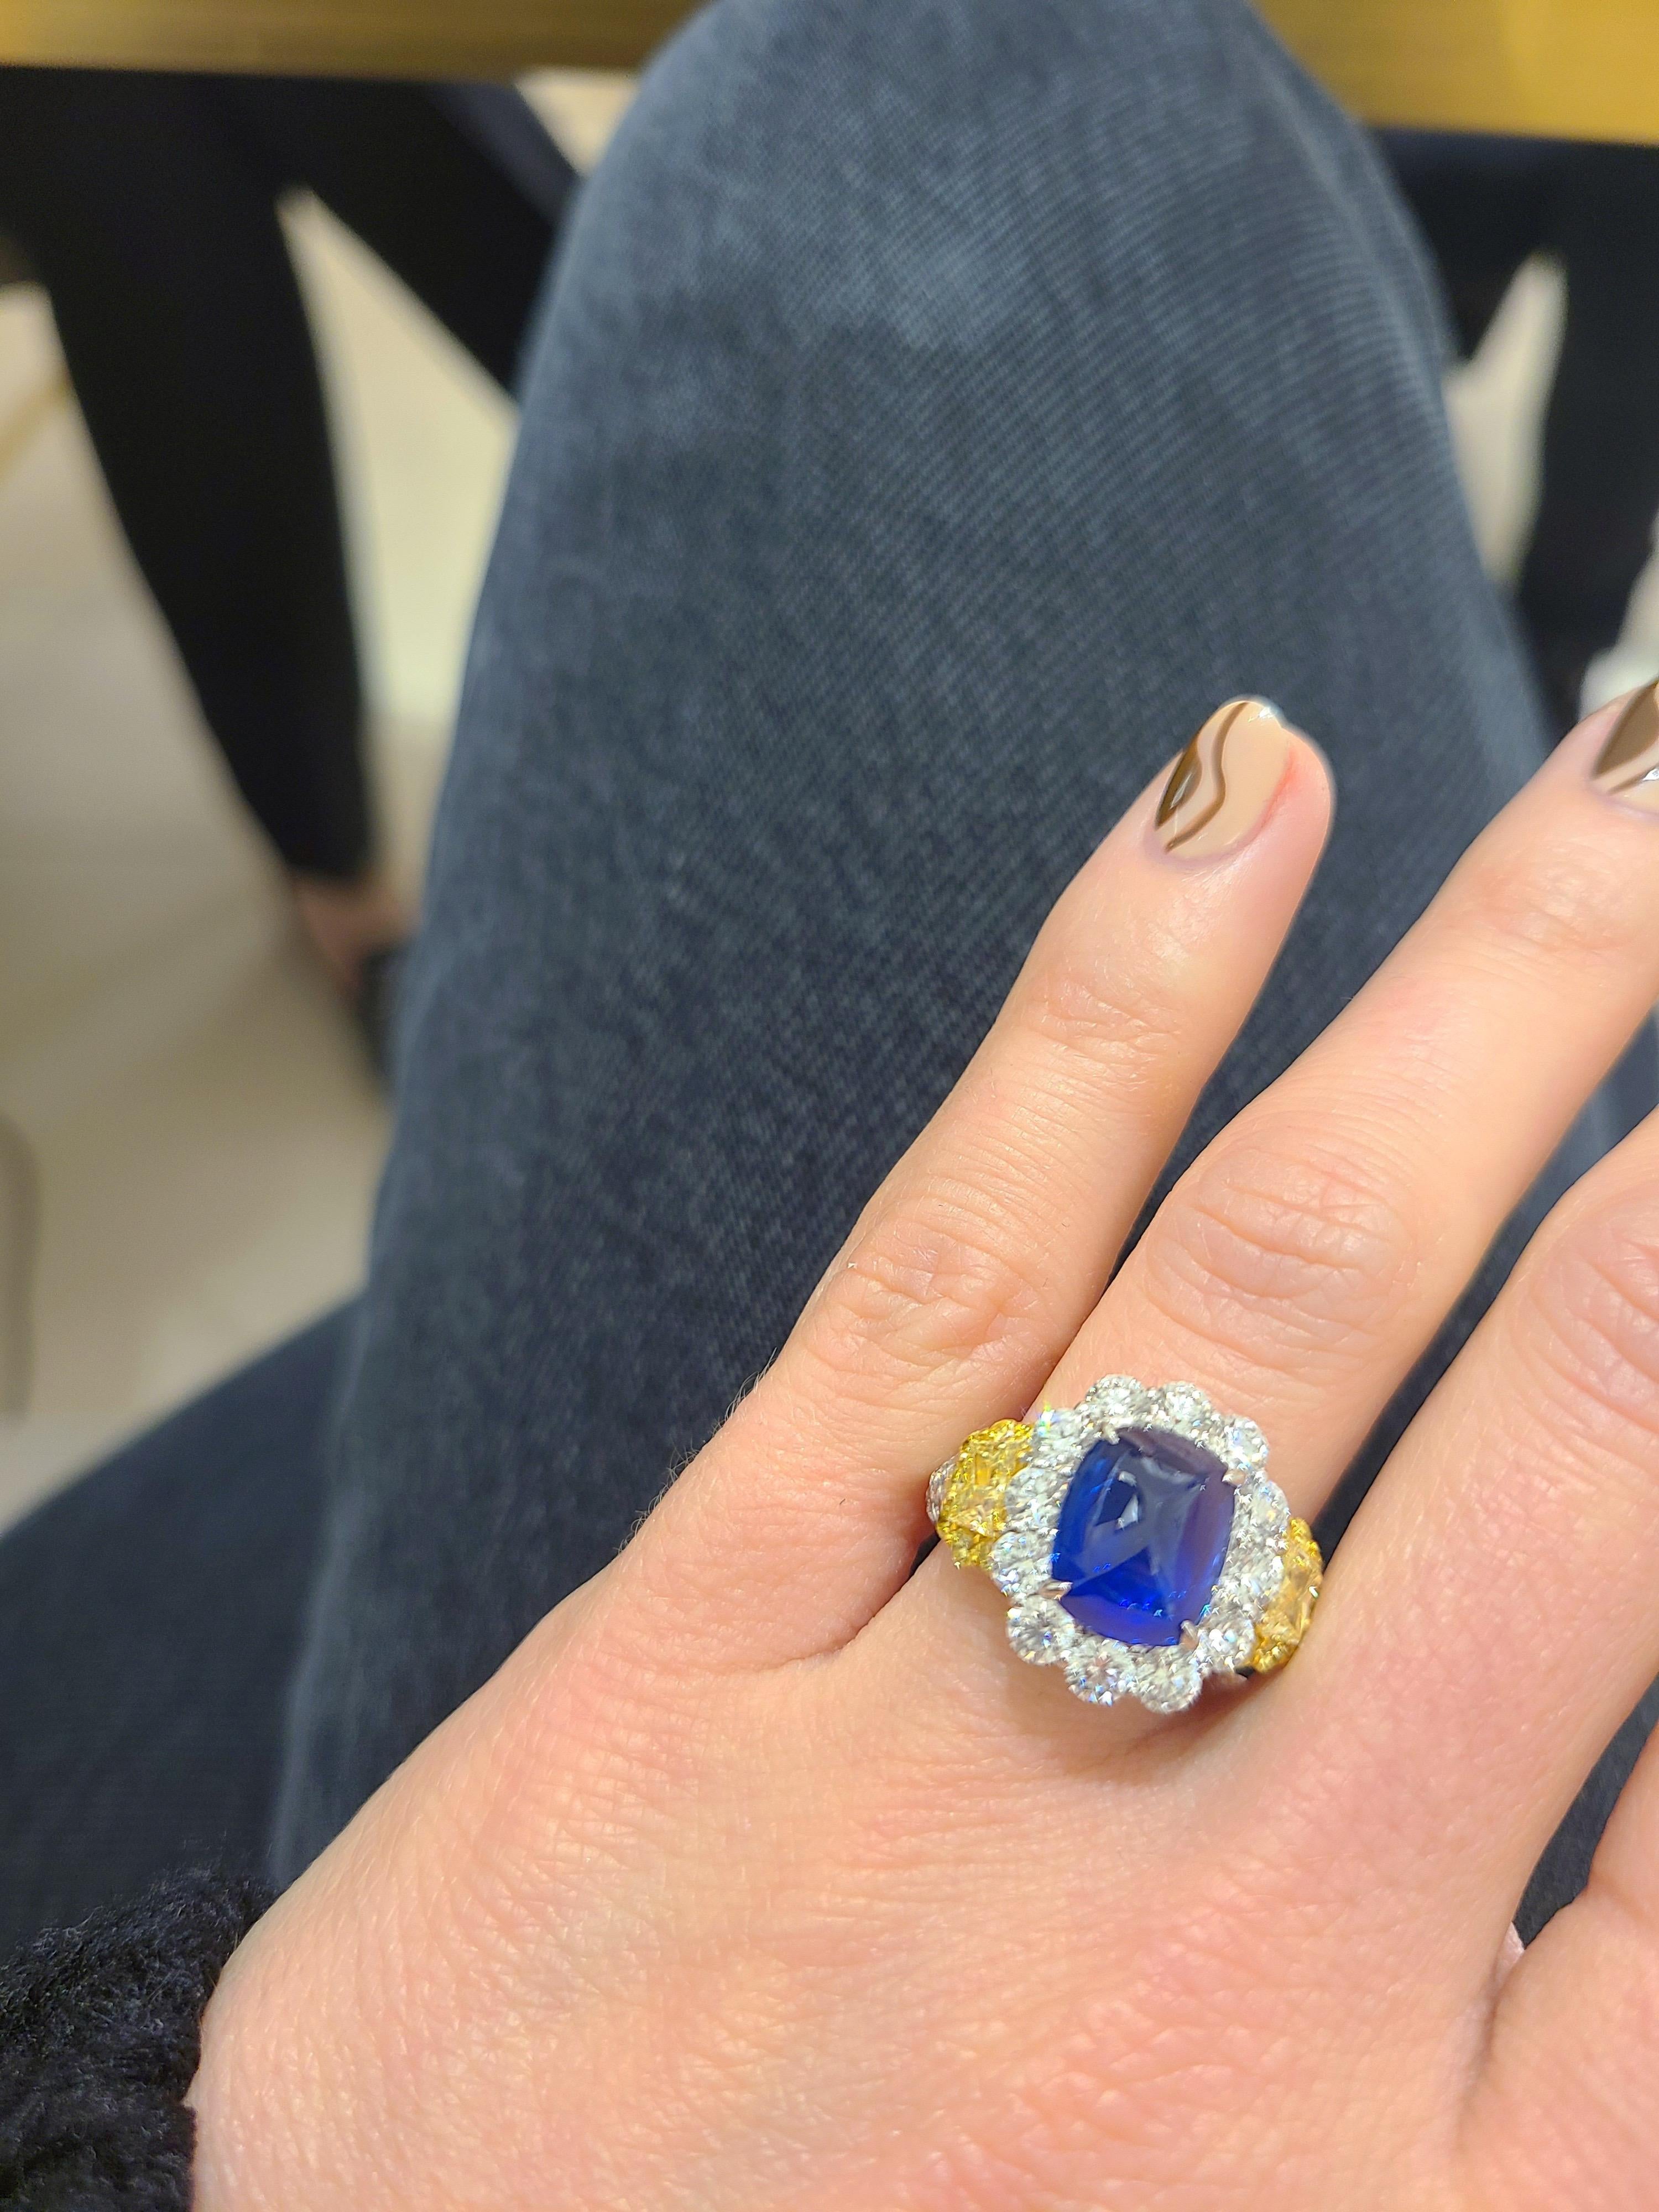 Cellini Plat/18KT 4.27Ct. Sugarloaf Sapphire, Fancy Yellow & White Diamond Ring For Sale 6